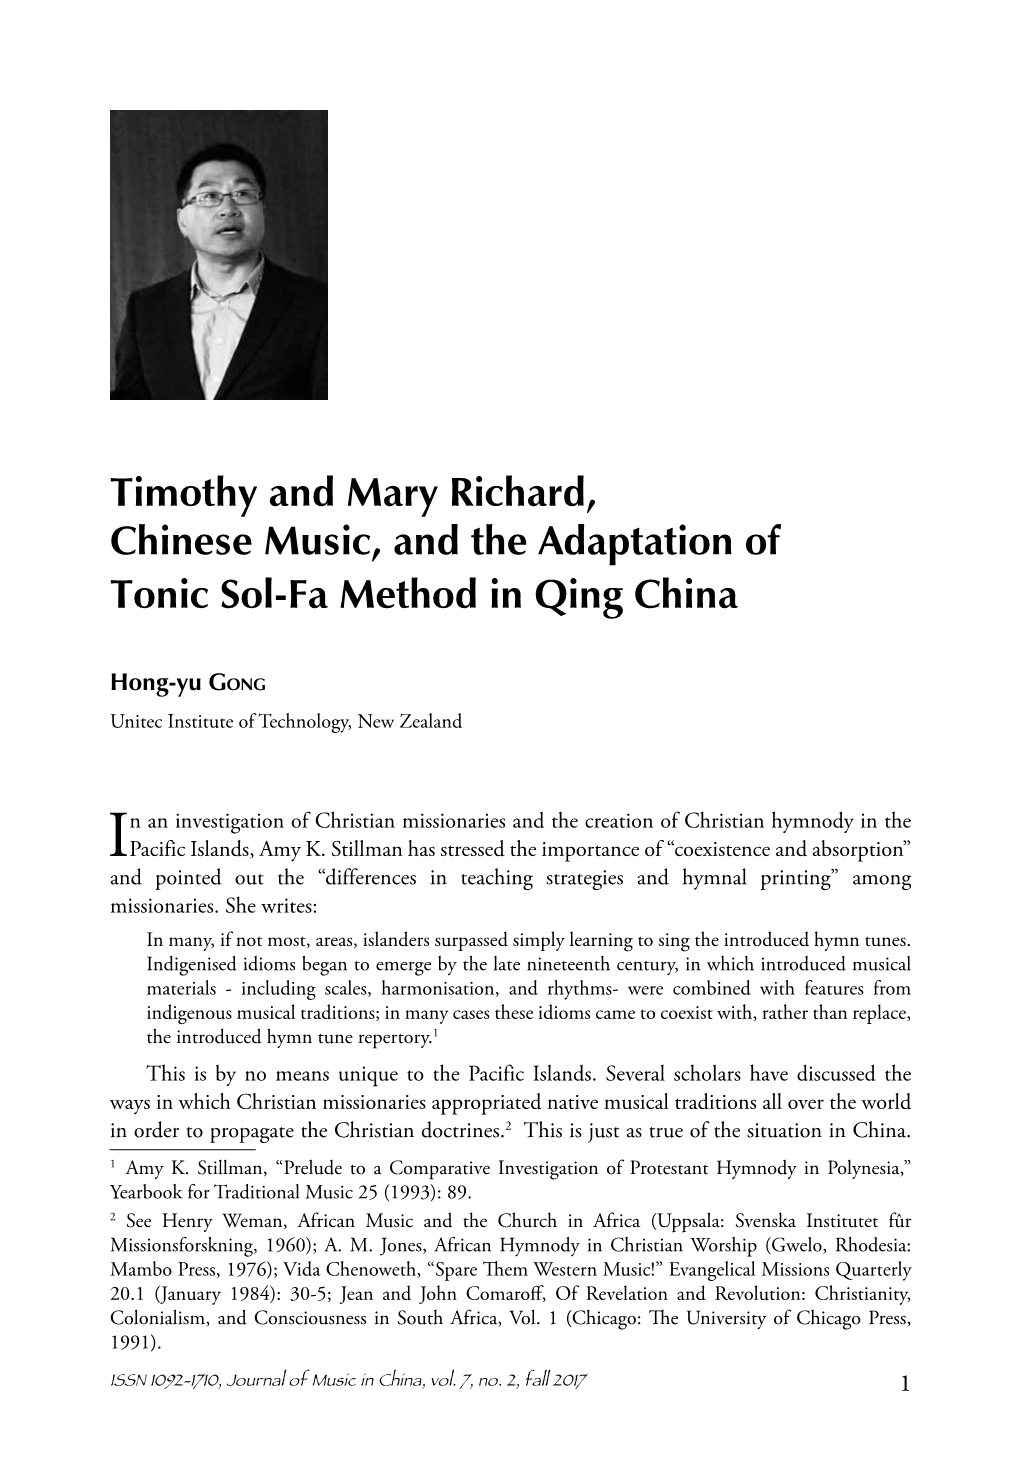 Timothy and Mary Richard, Chinese Music, and the Adaptation of Tonic Sol-Fa Method in Qing China